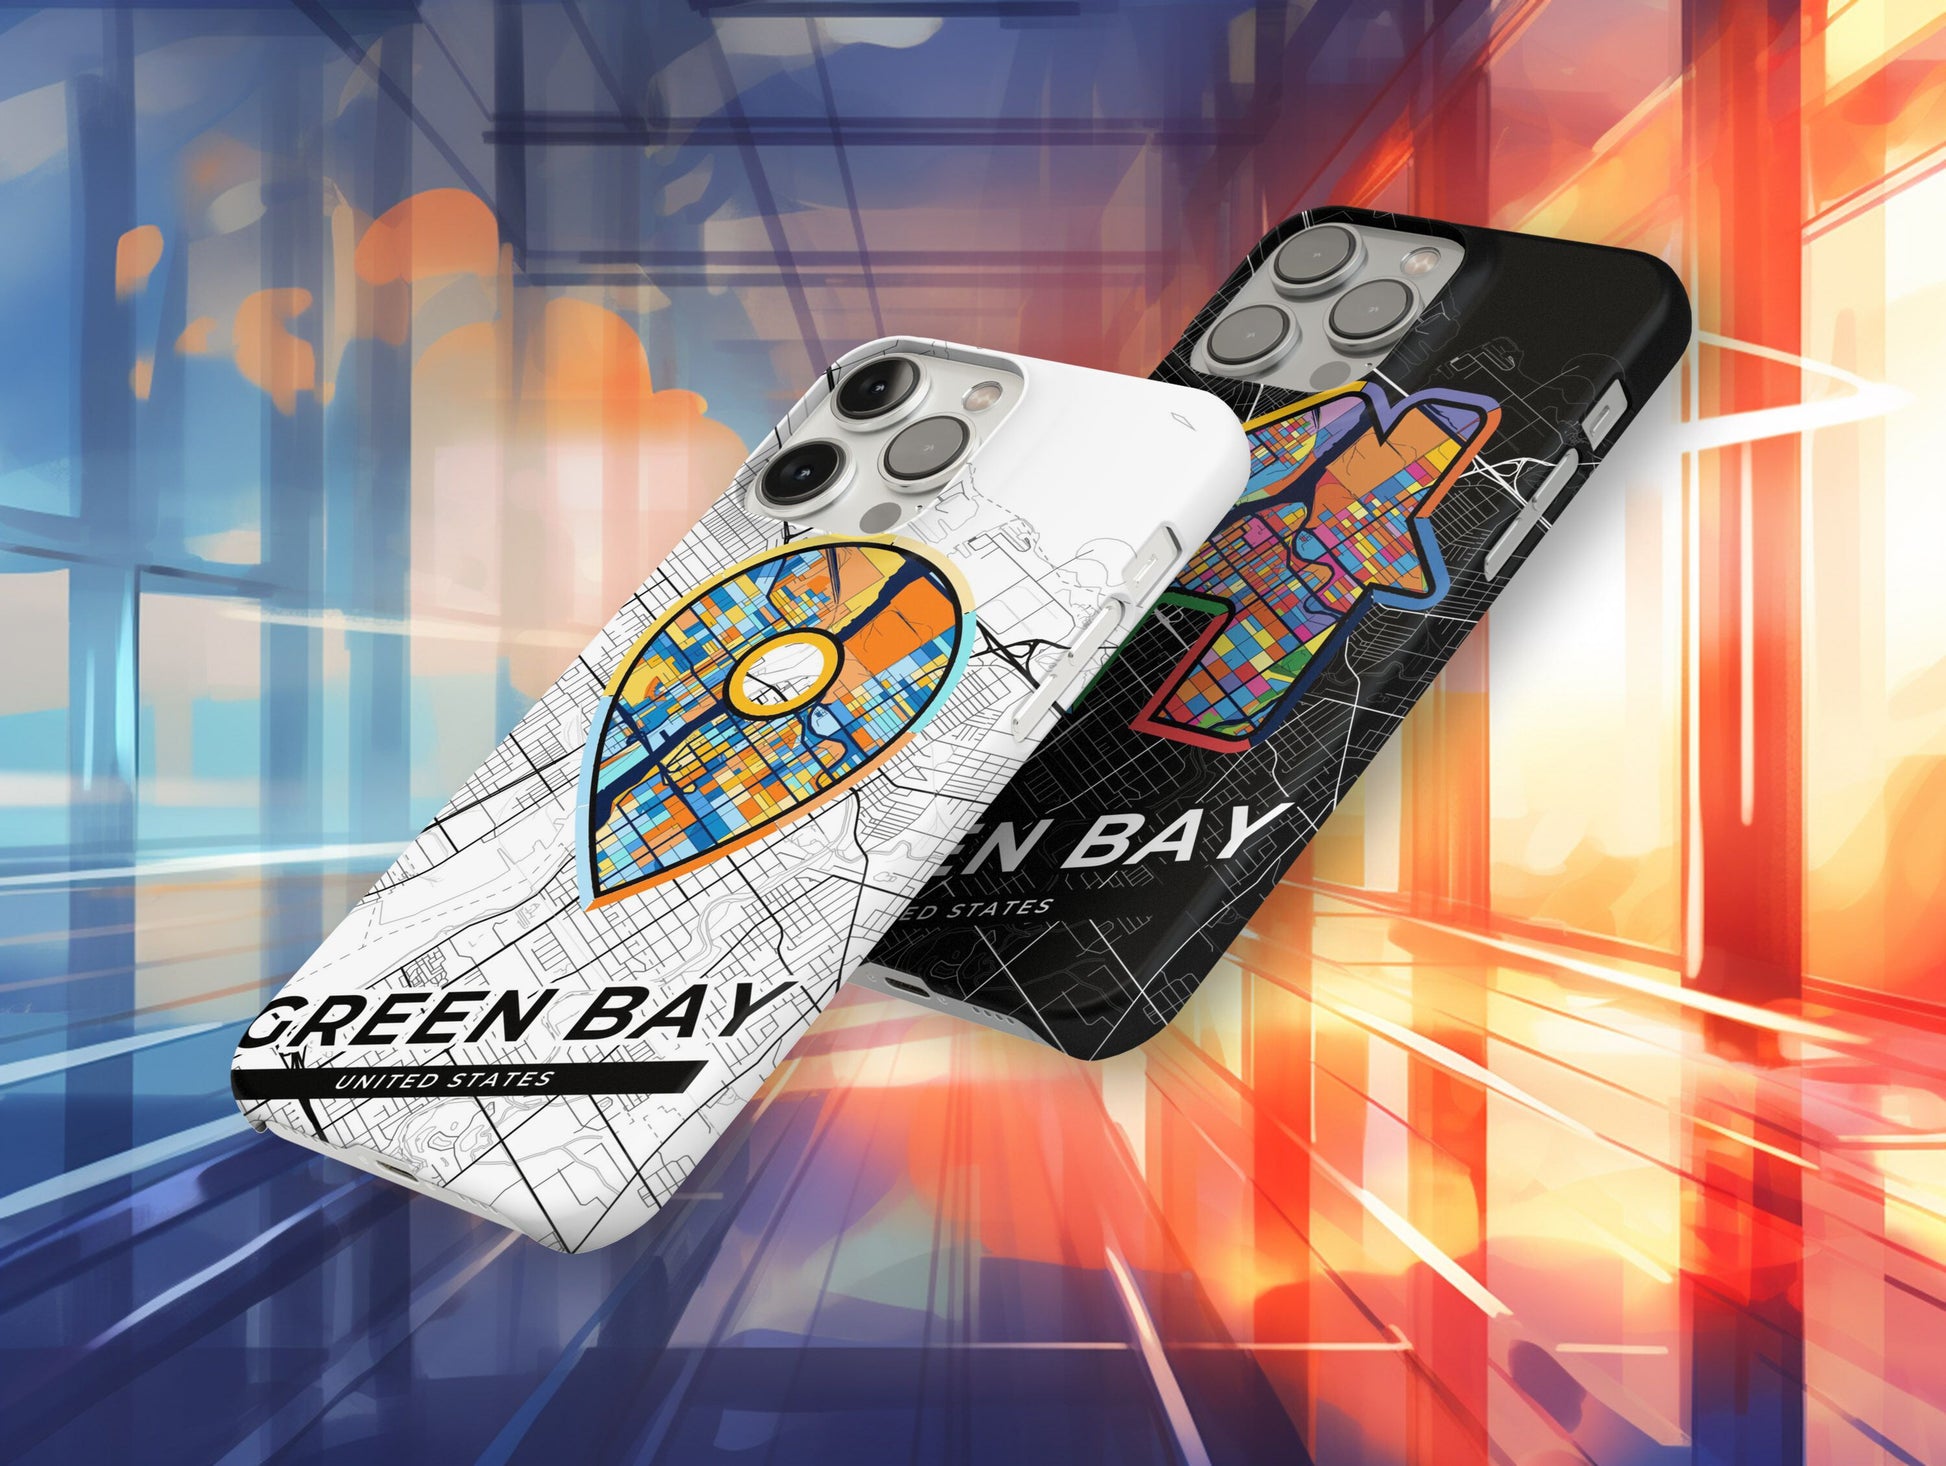 Green Bay Wisconsin slim phone case with colorful icon. Birthday, wedding or housewarming gift. Couple match cases.